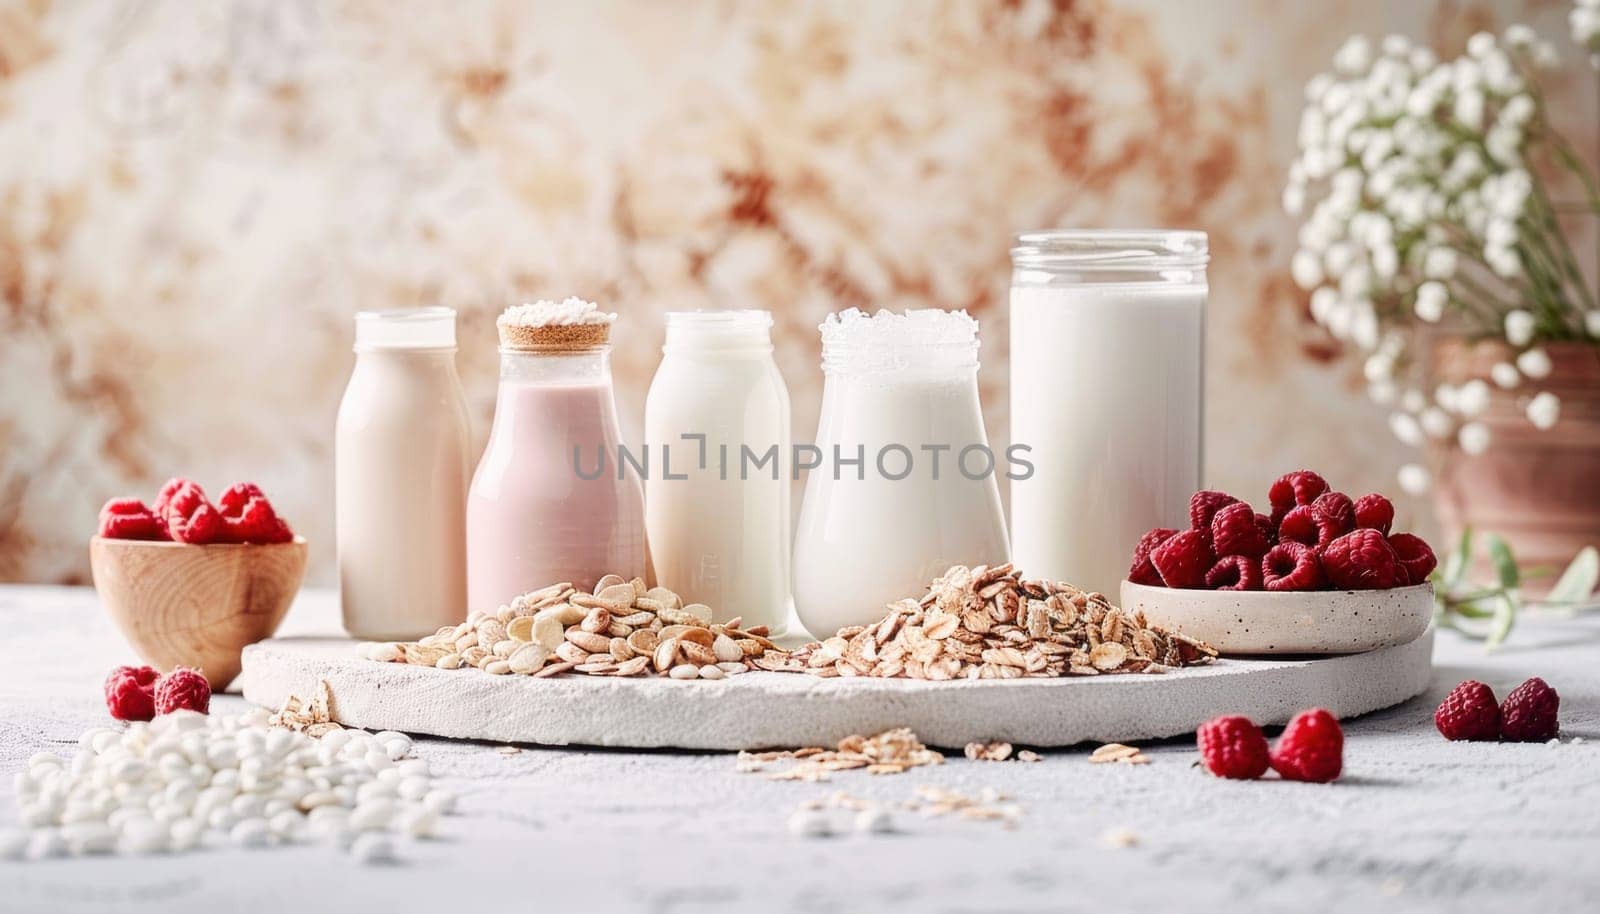 Various types of milk and yogurt are neatly arranged and presented on the table for a visually appealing display